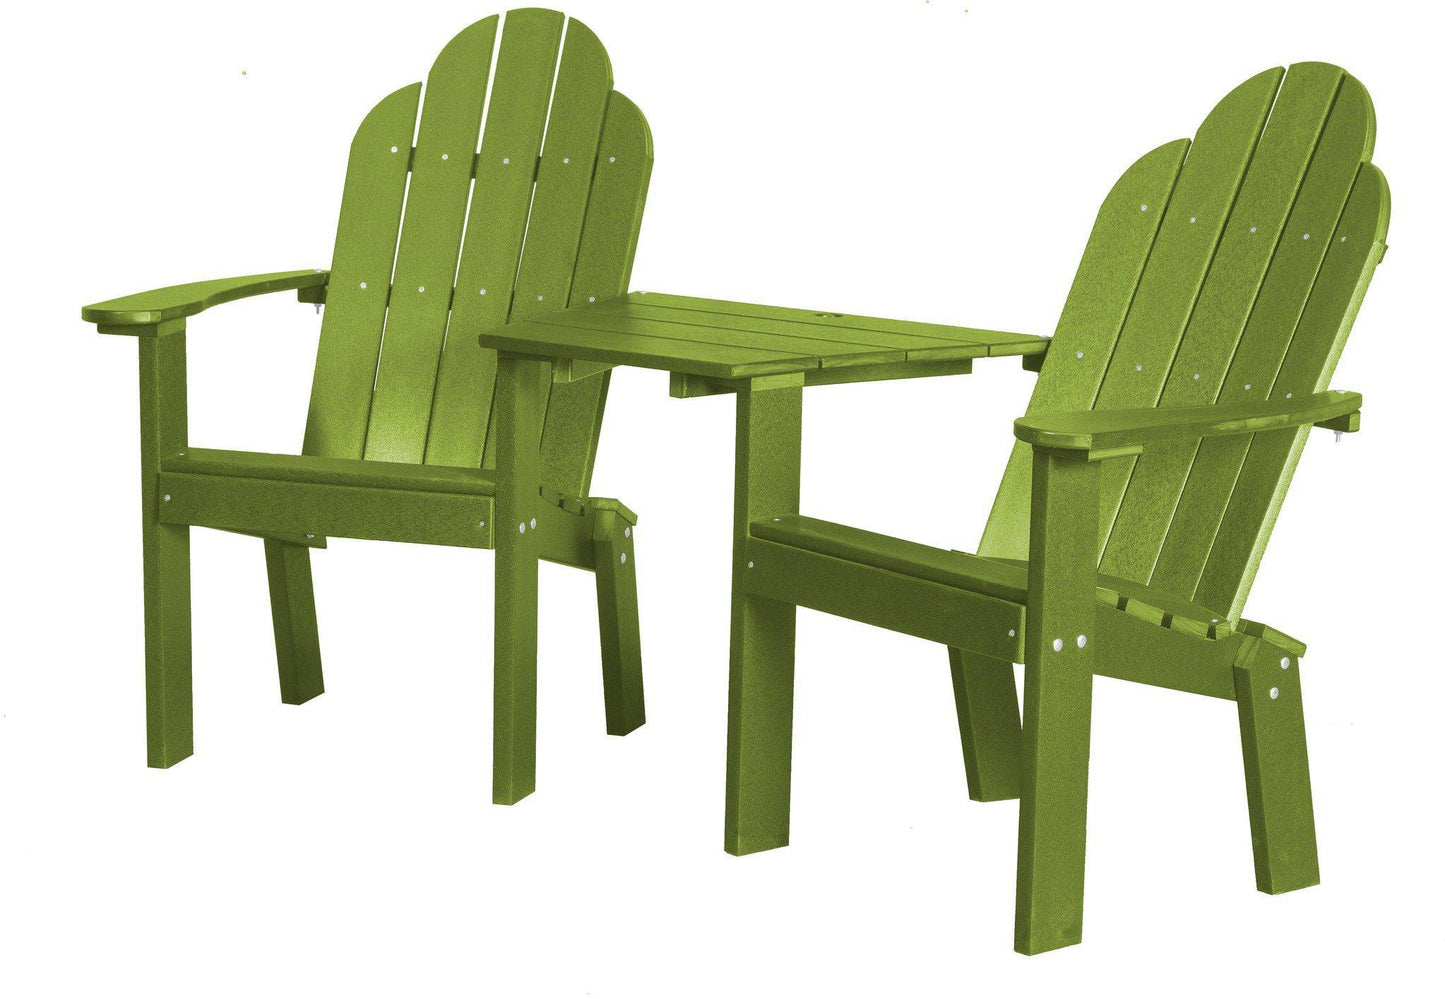 Wildridge Outdoor Recycled Plastic Classic Deck Chair Tete a Tete - LEAD TIME TO SHIP 6 WEEKS OR LESS